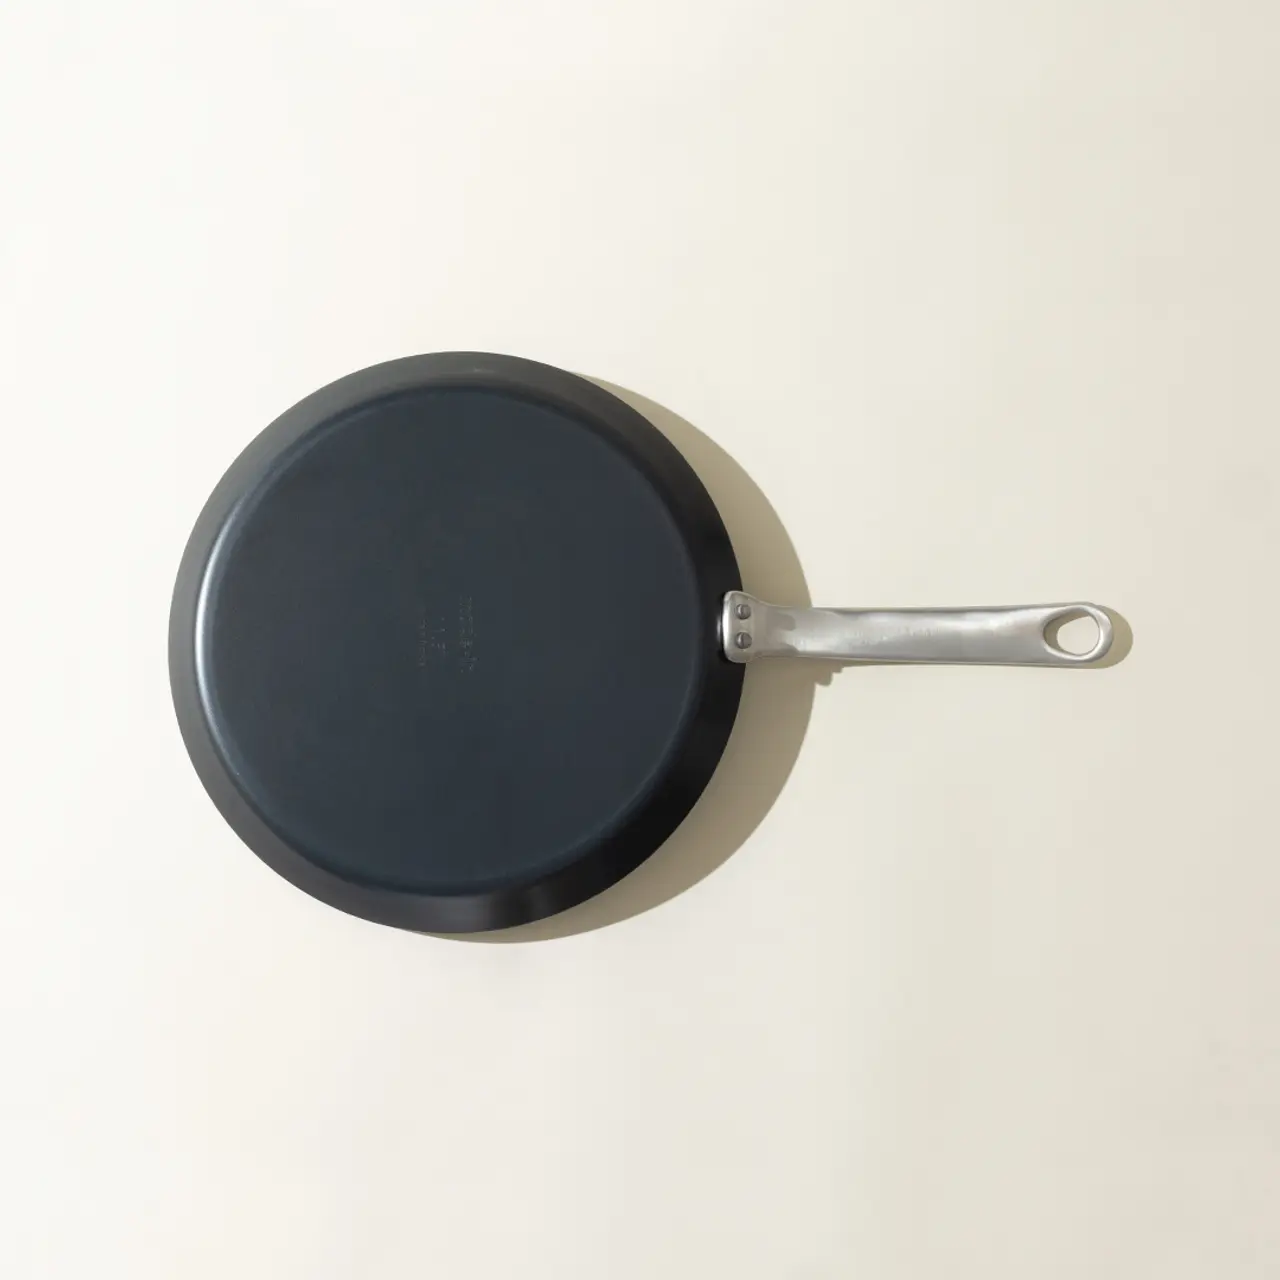 A non-stick frying pan with a long handle is placed on a light-colored surface, viewed from above.